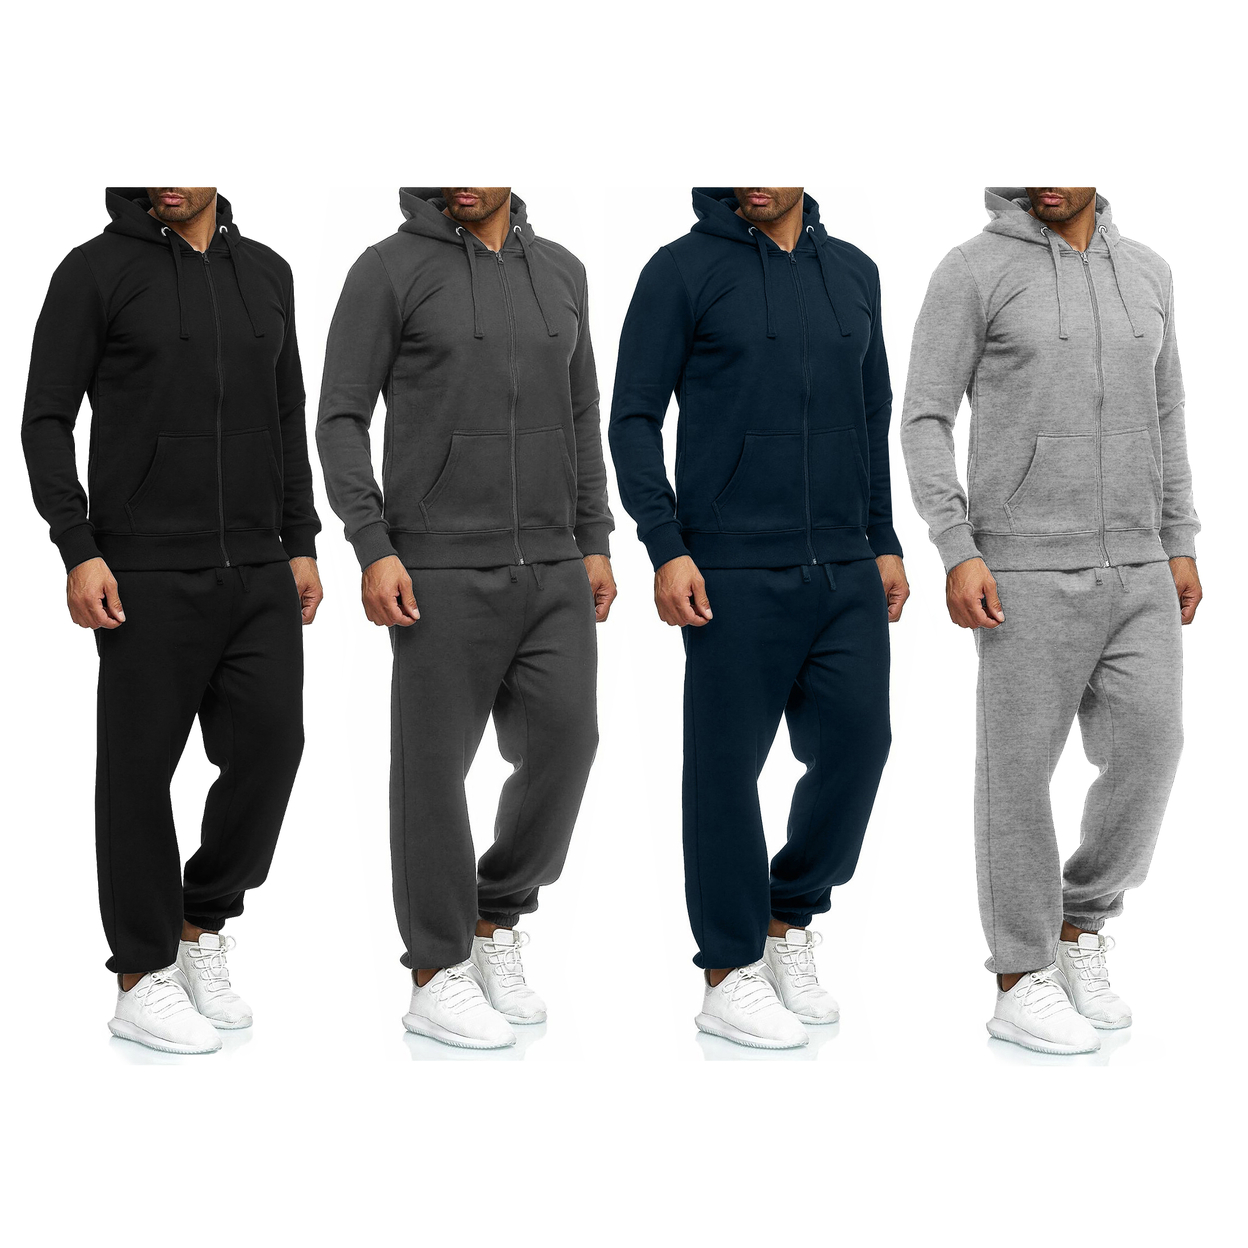 Multi-Pack: Men's Casual Big & Tall Athletic Active Winter Warm Fleece Lined Full Zip Tracksuit Jogger Set - Black, 2-pack, X-large